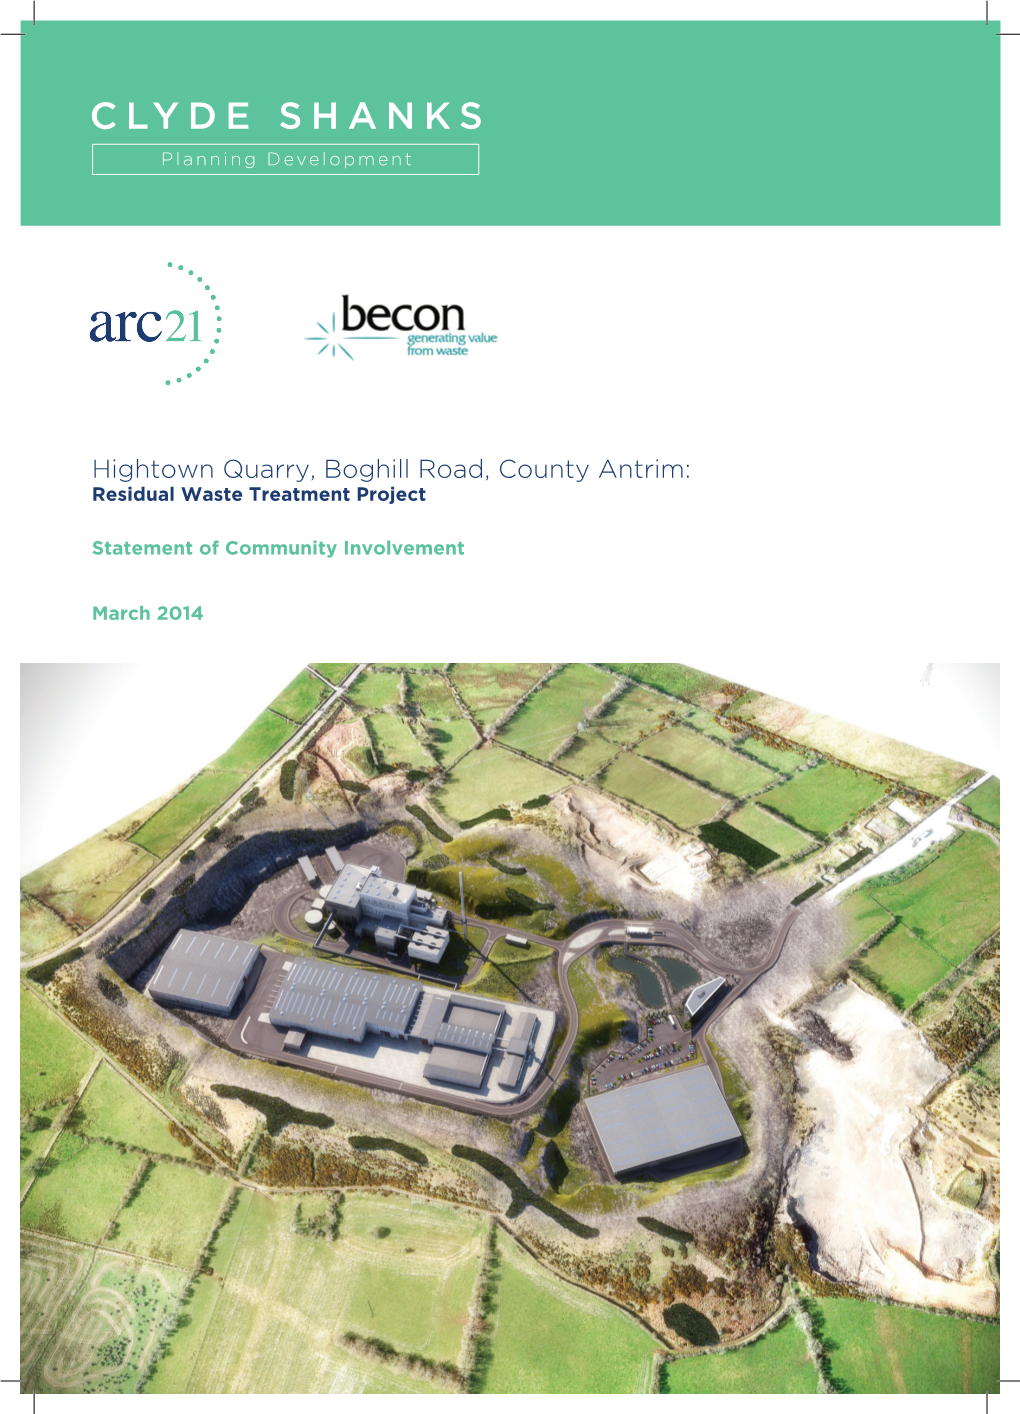 Hightown Quarry, Boghill Road, County Antrim: Residual Waste Treatment Project